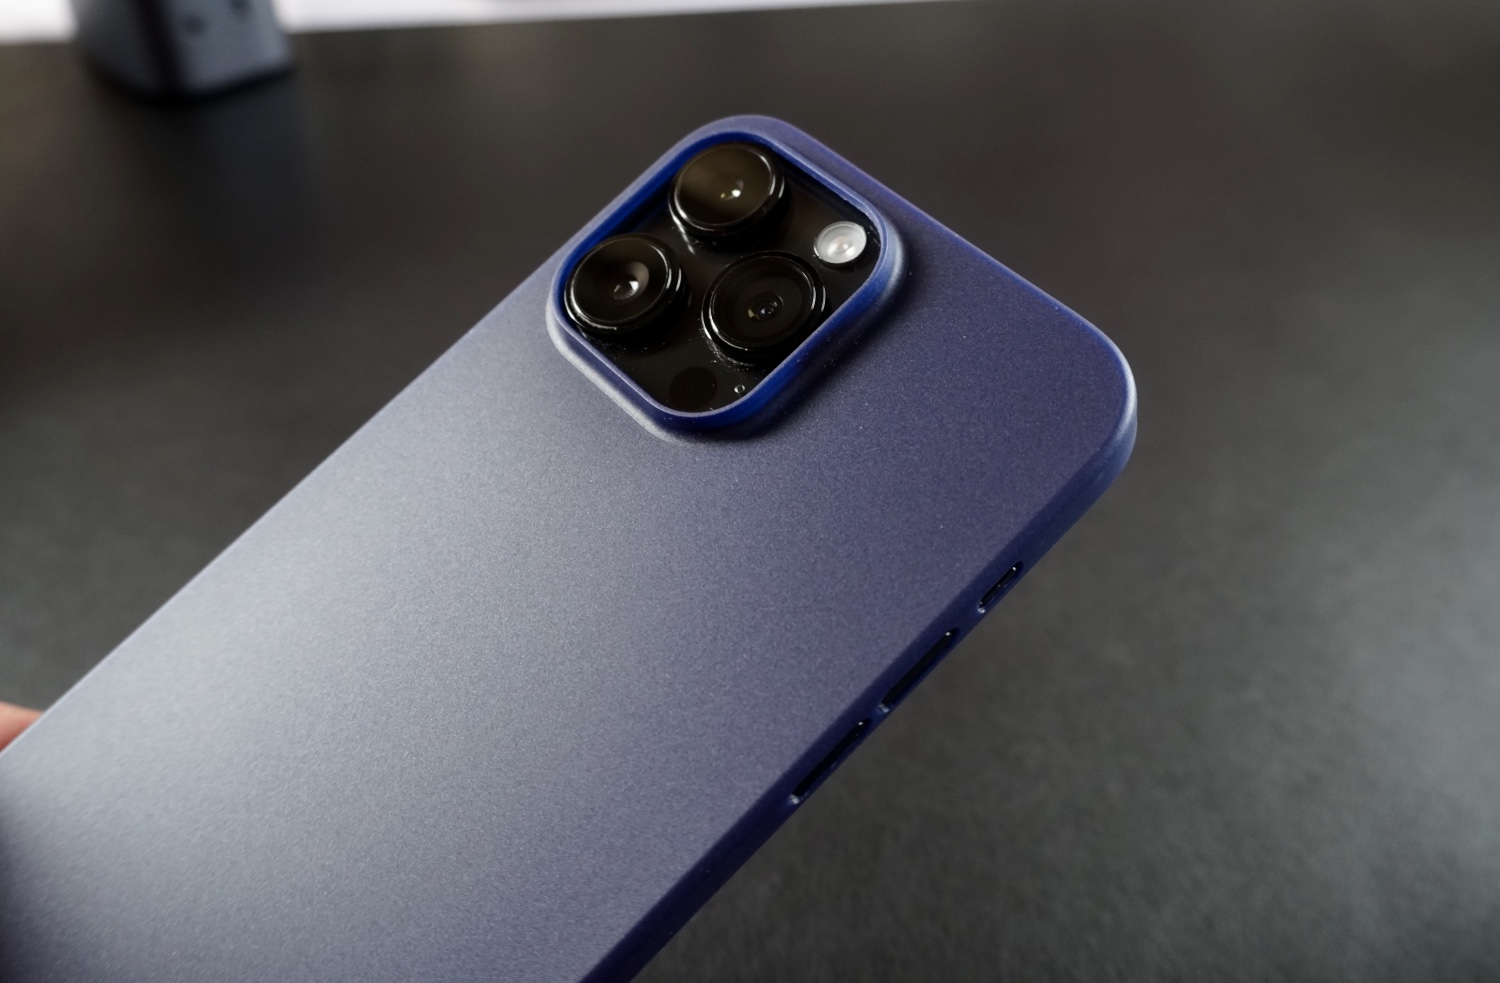 Totallee Hybrid iPhone 13 Pro Max case review - A minimalists